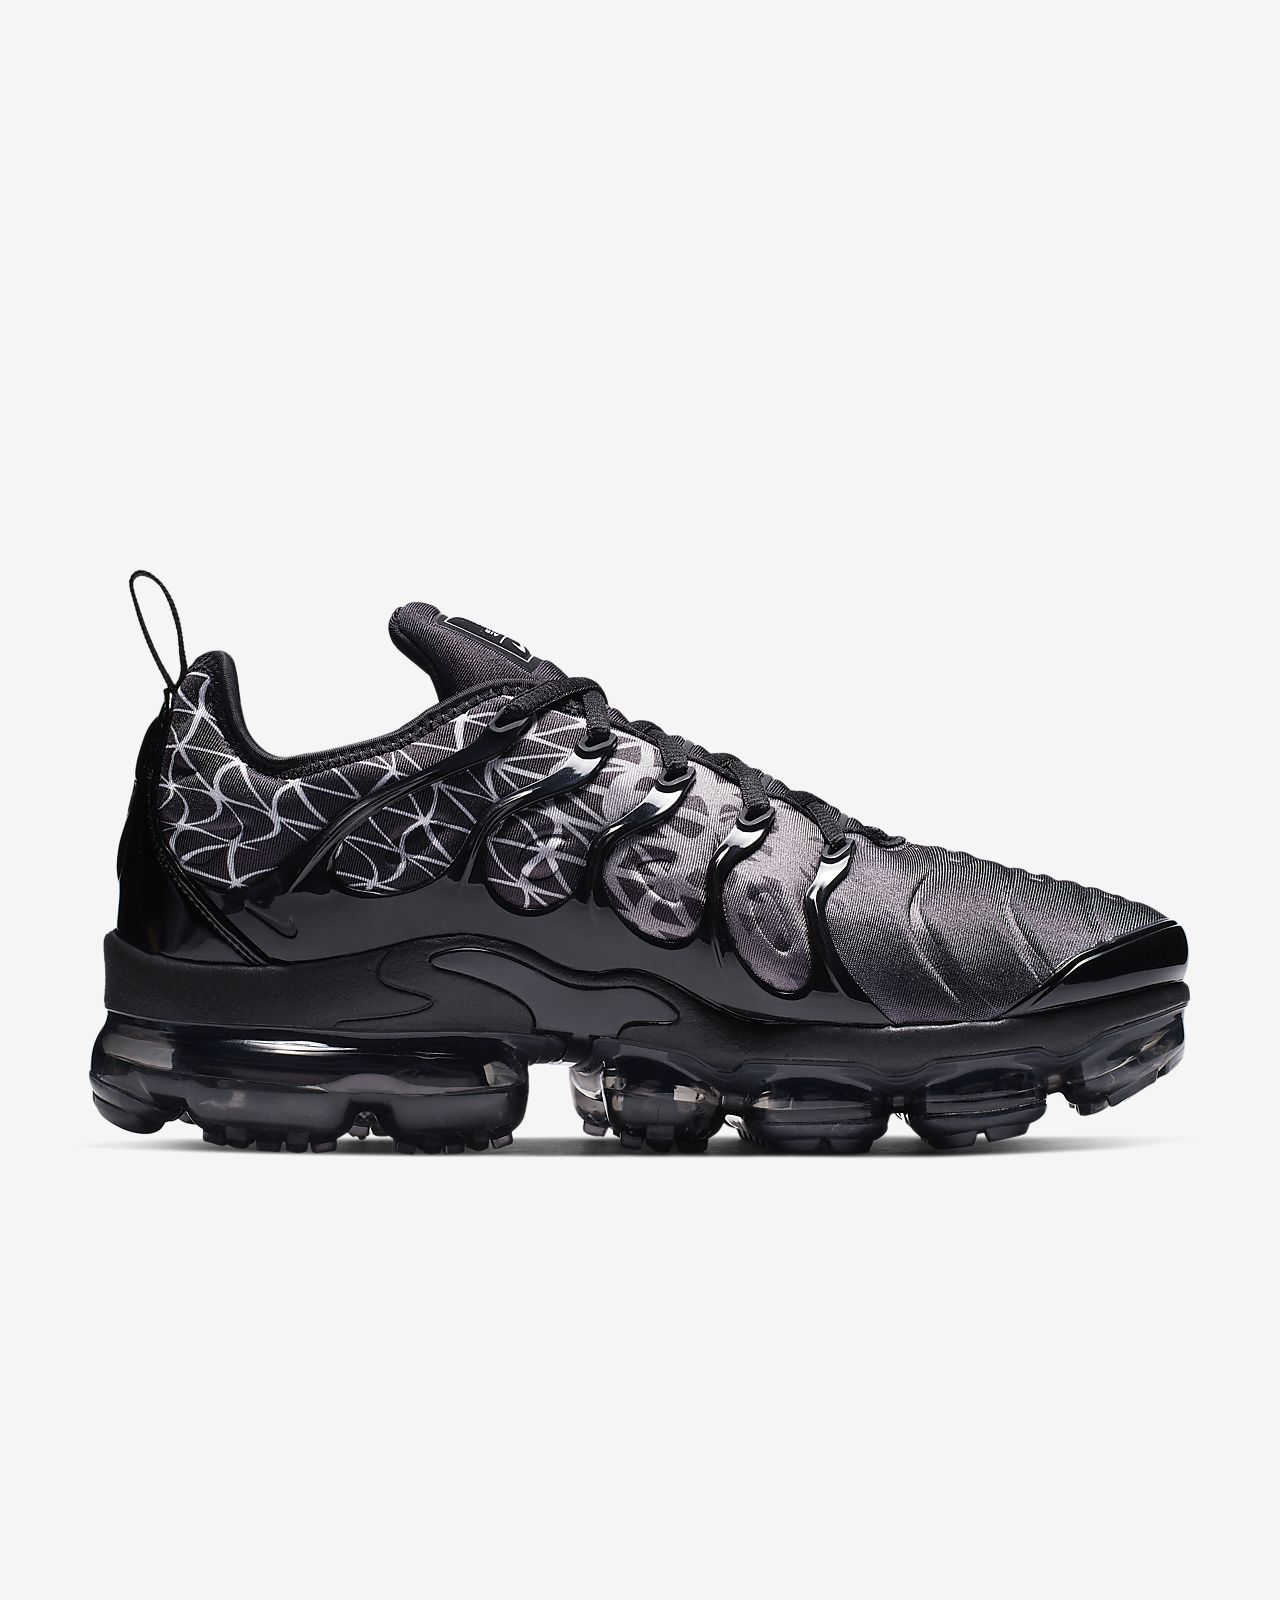 This New Nike Air VaporMax Plus Comes With Large Nike